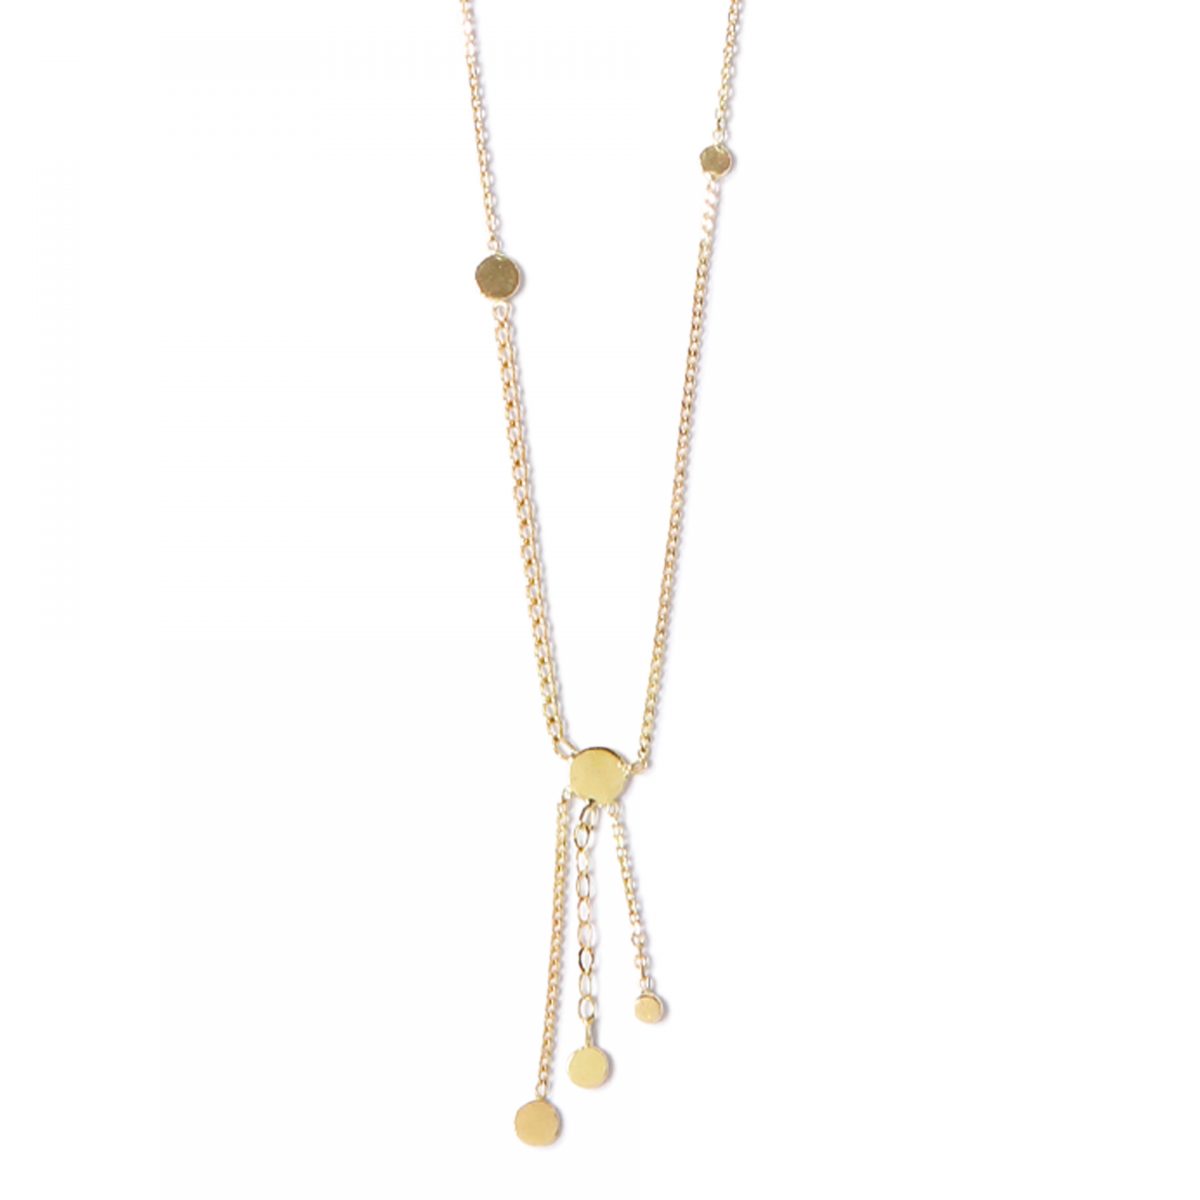 swp_necklace_303_241